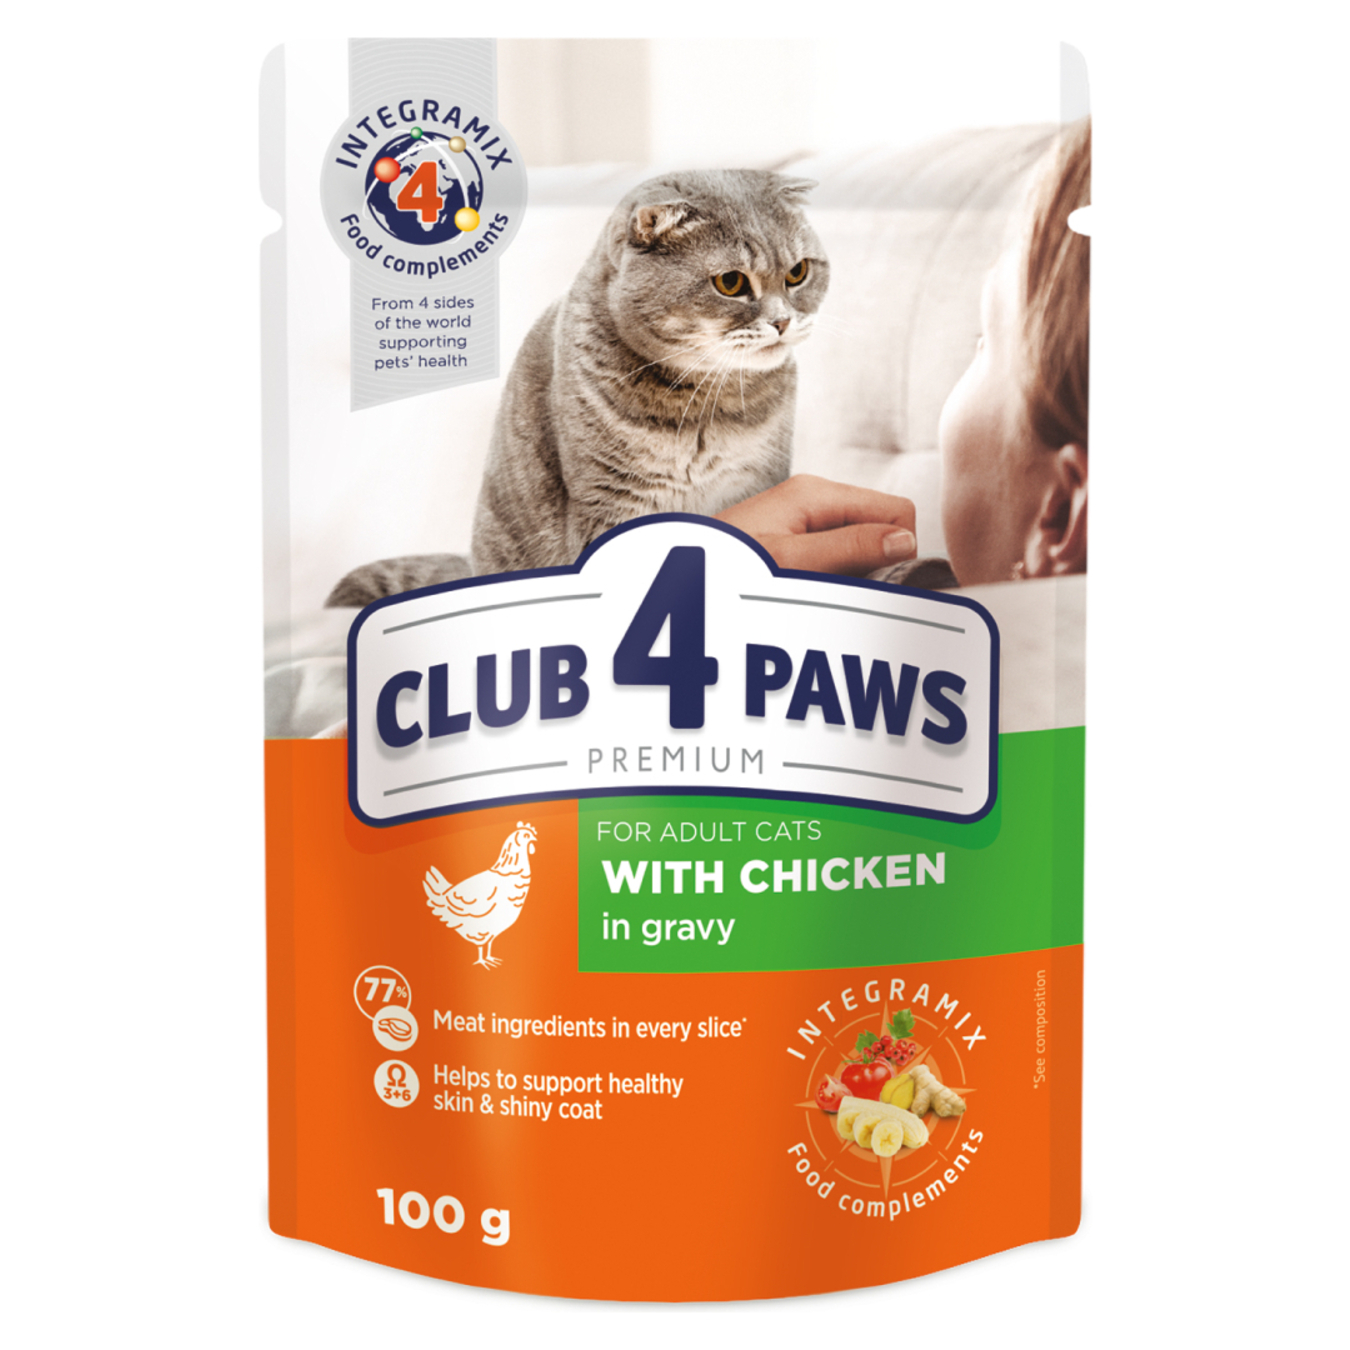 Feed Club 4 Рaws Premium chicken sauce for cats 100g